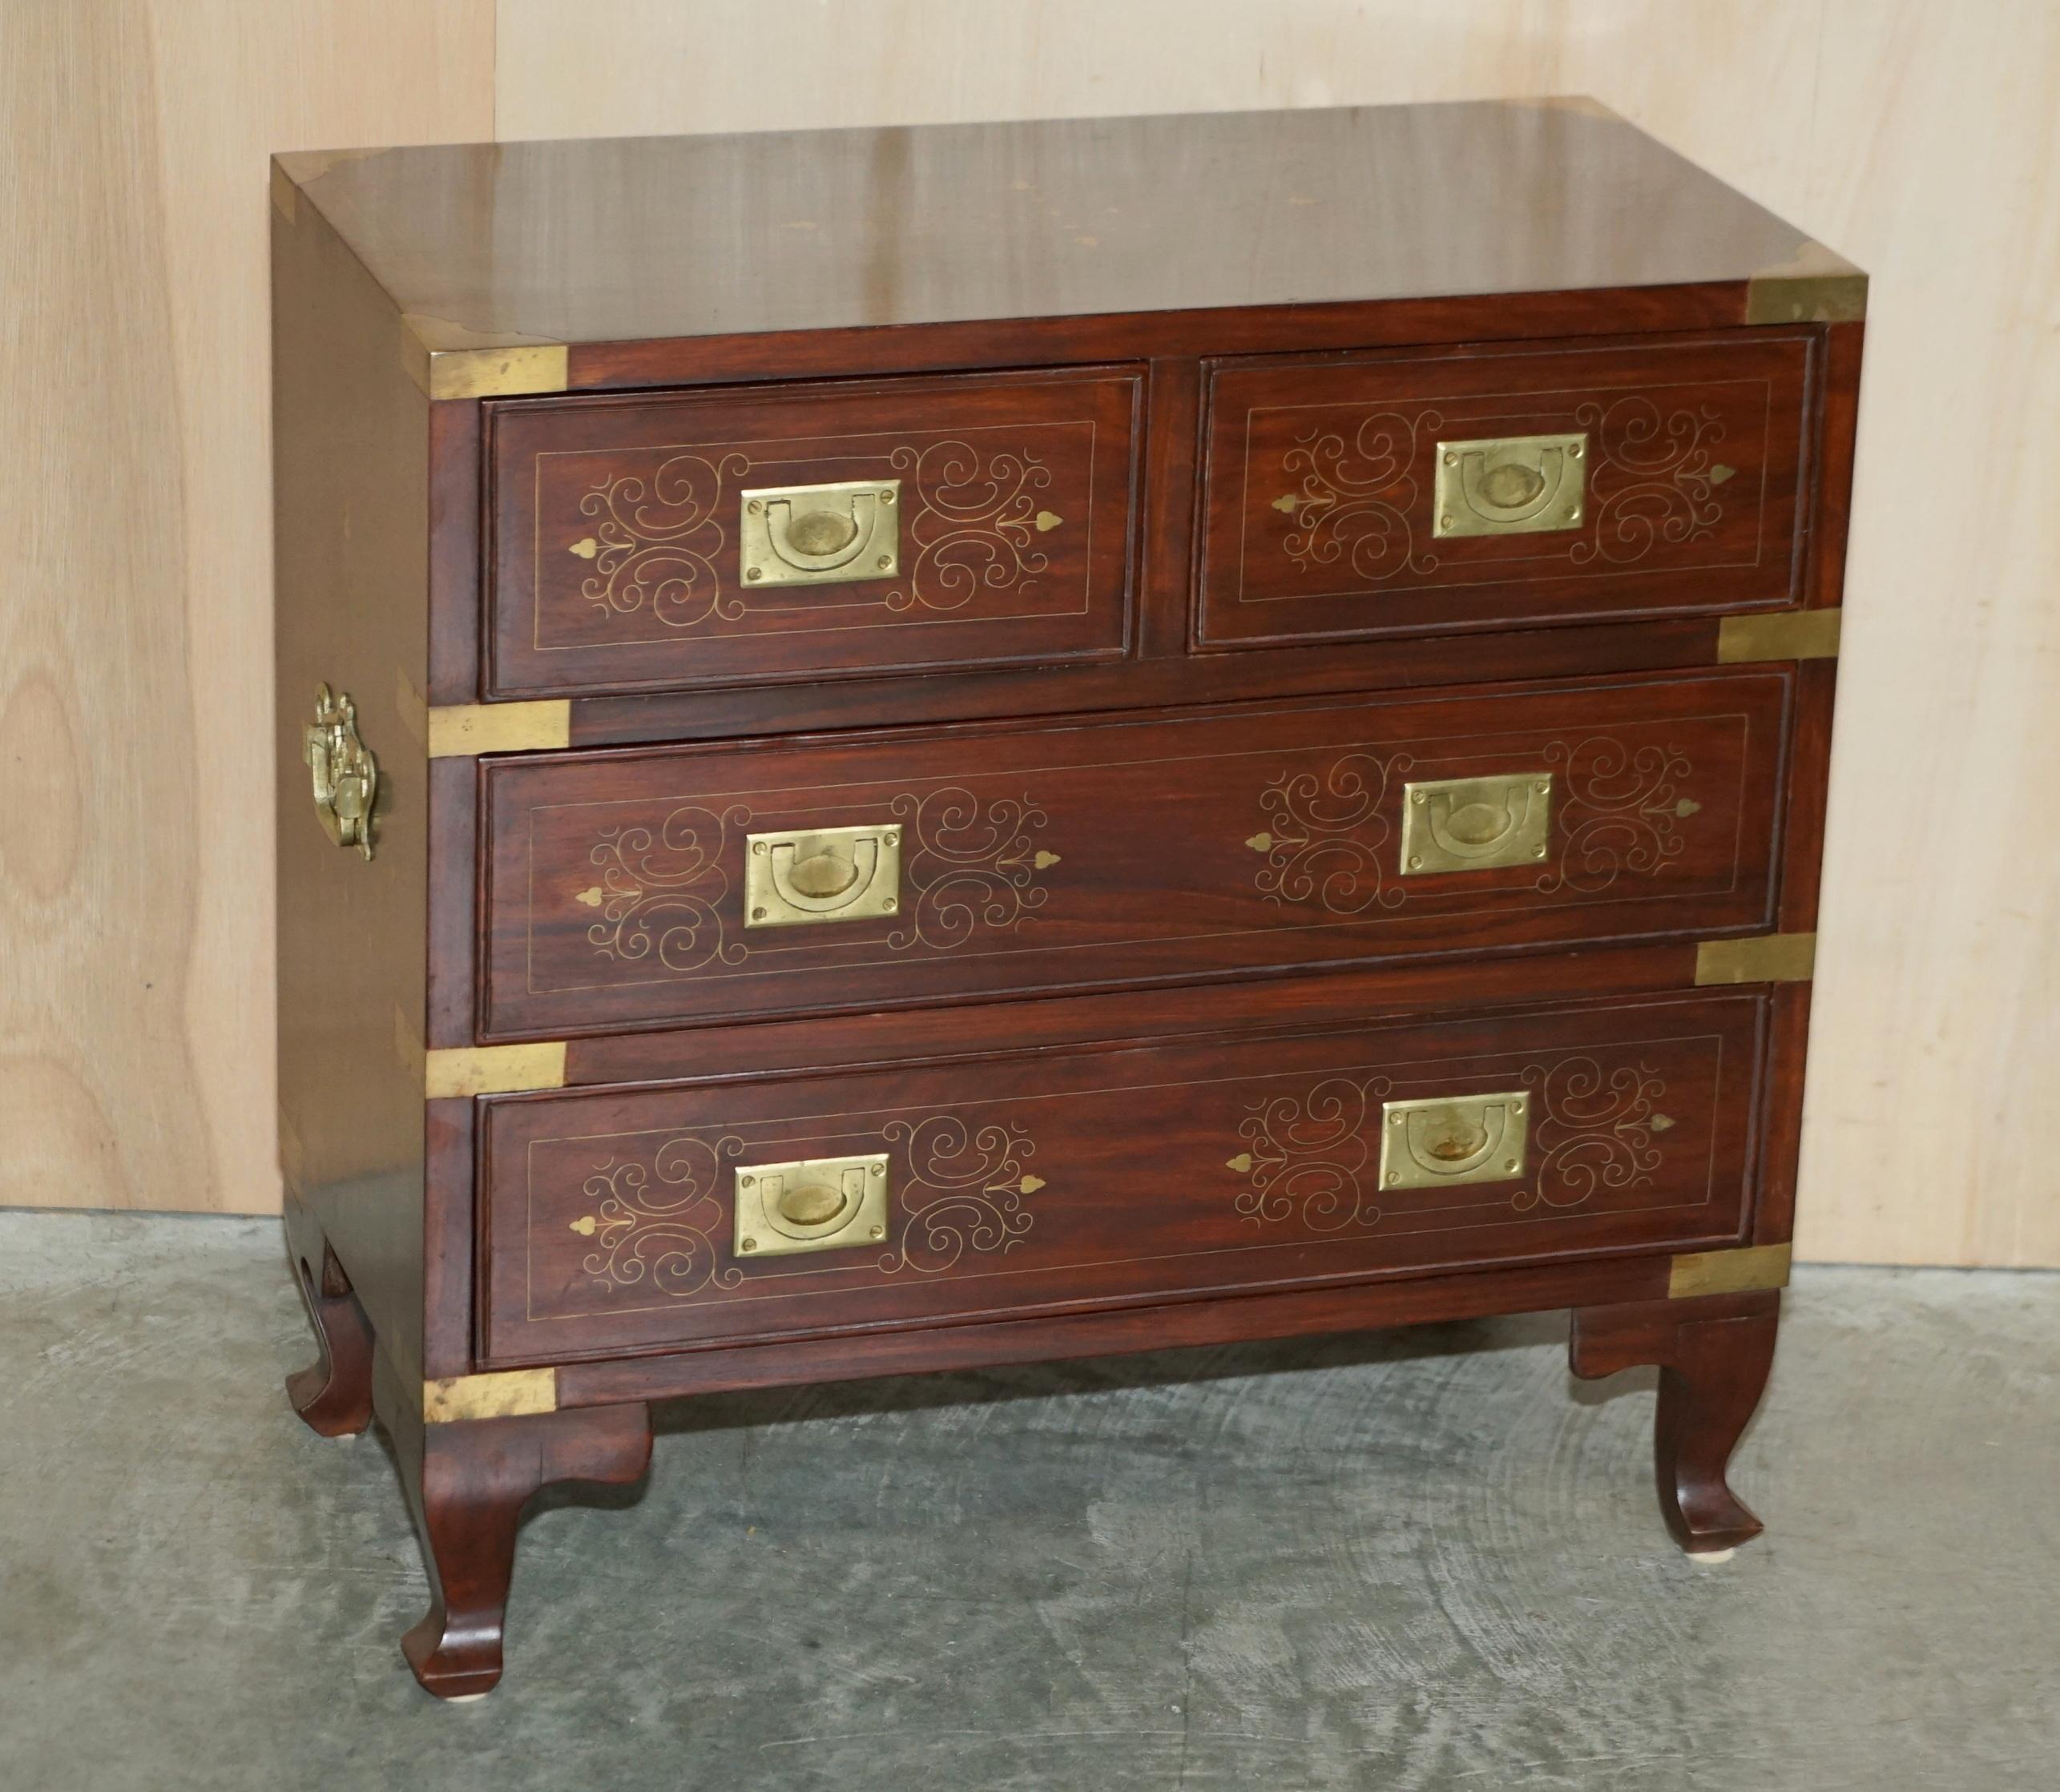 We are delighted to offer for sale this stunning original pair of circa 1900 Anglo Indian Military Campaign side table sized chest of drawers.

A good looking well made and utilitarian pair, they can sit in just about any room of the house and be